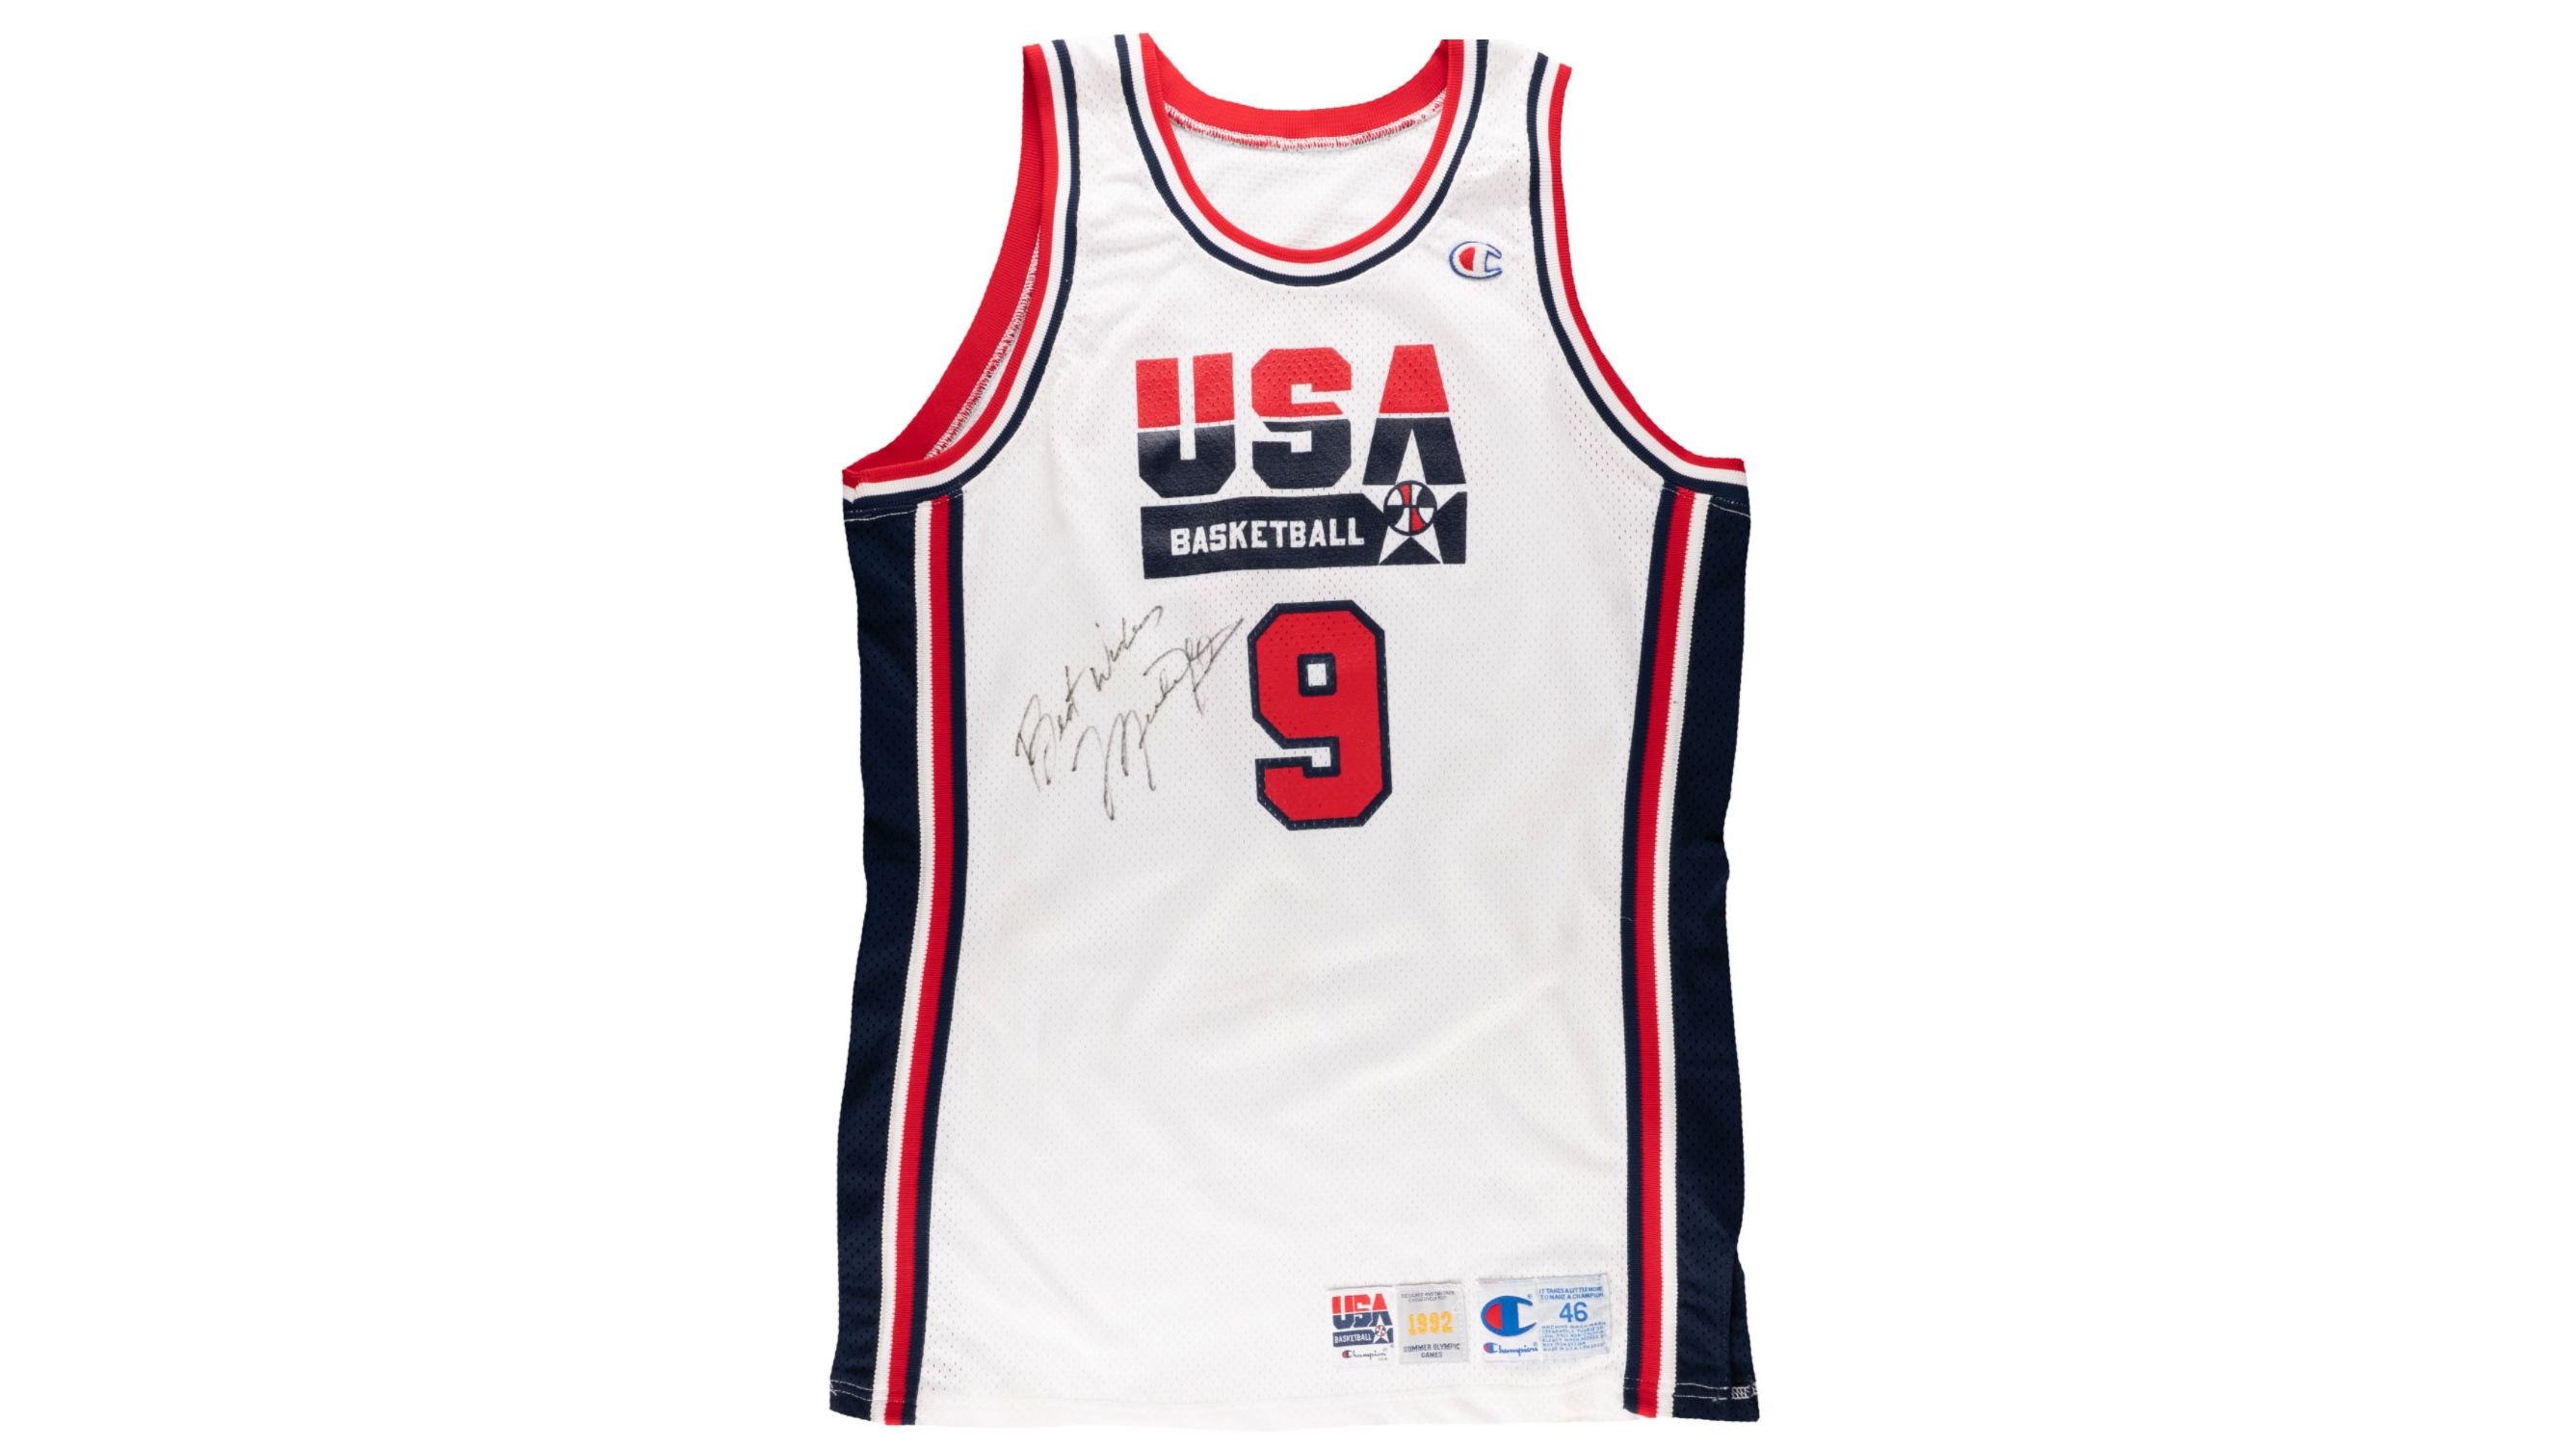 A jersey worn and signed by Michael Jordan sold for over $200,000 at auction.